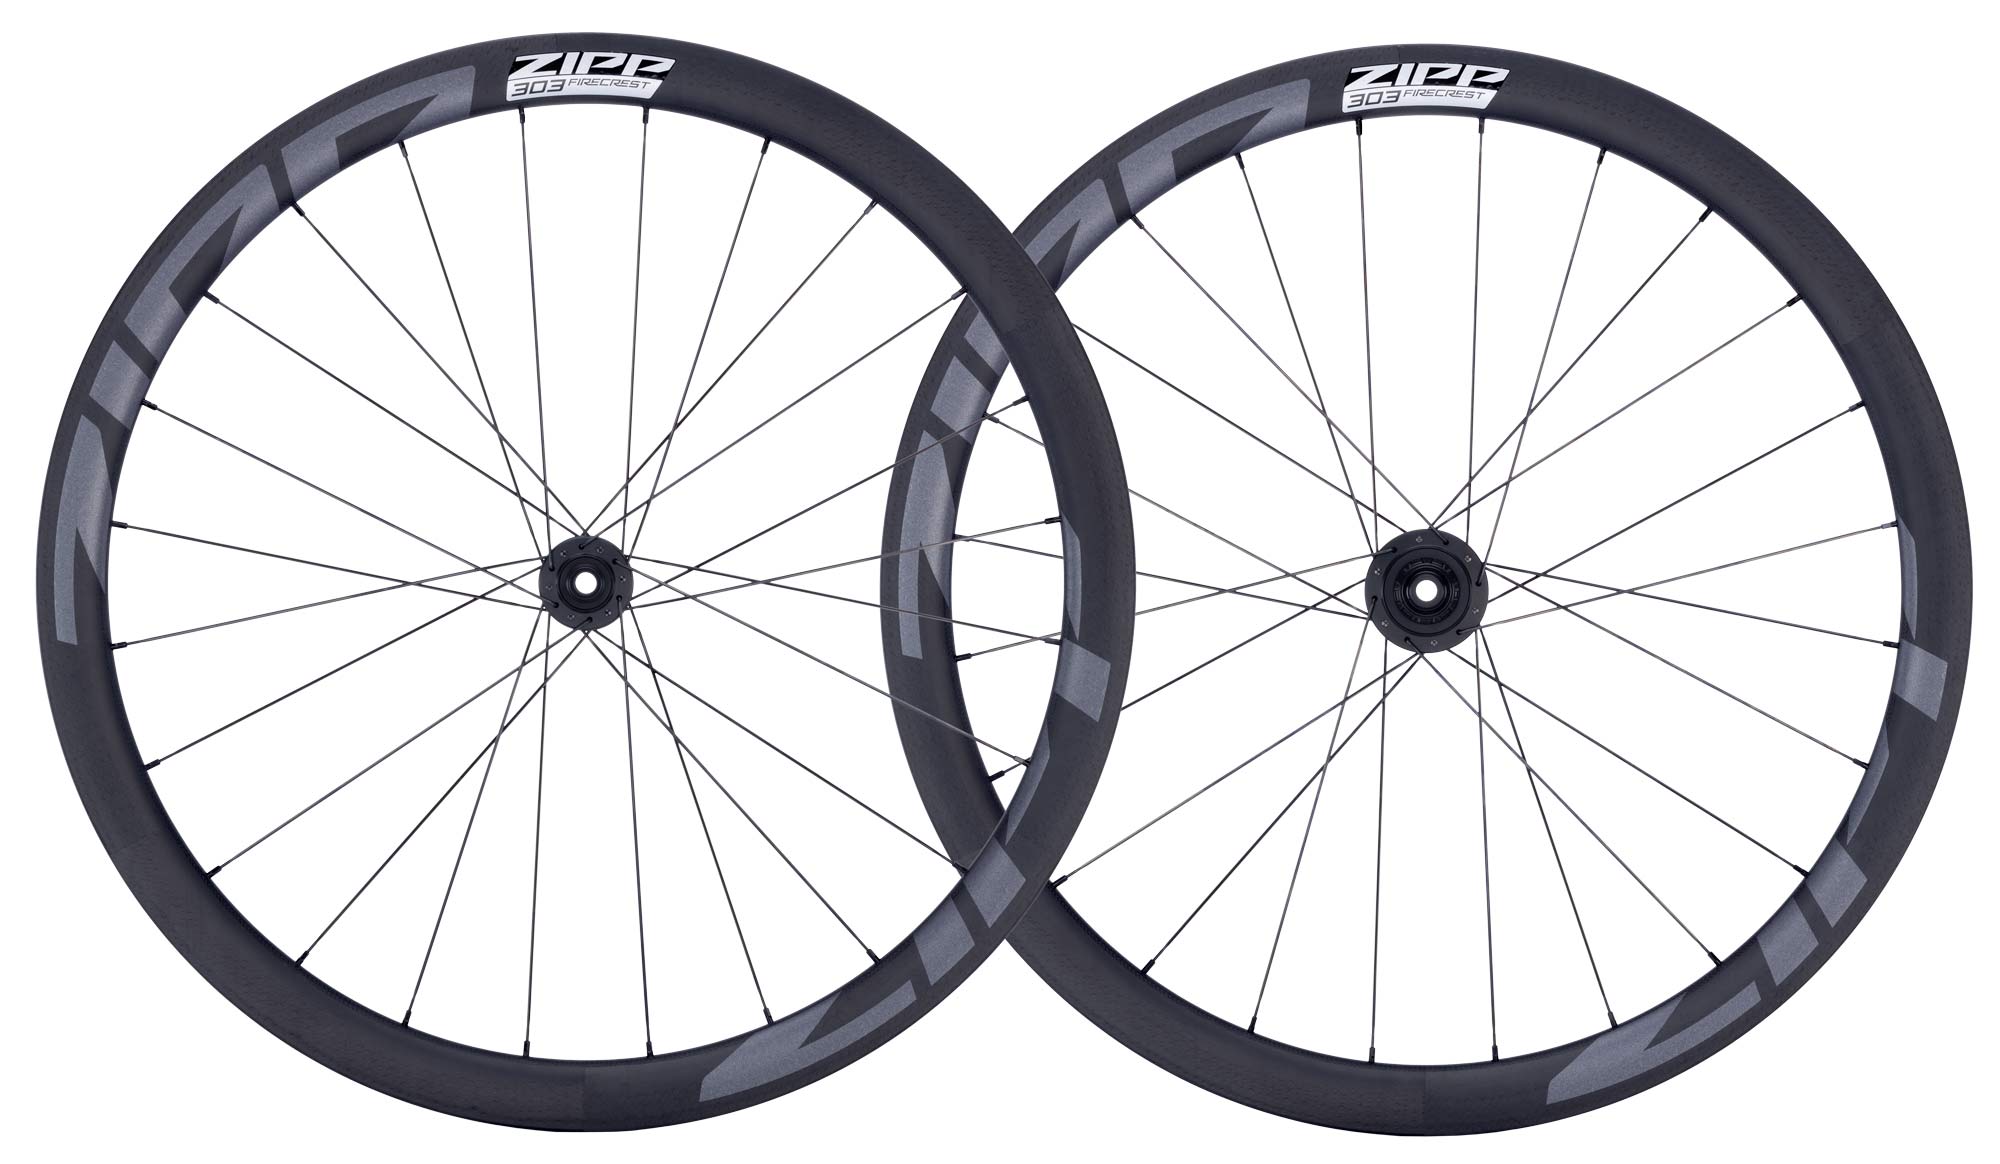 new disc brake hookless tubeless zipp 303 firecrest wheels will also come with a rim brake version using the older 303 rims